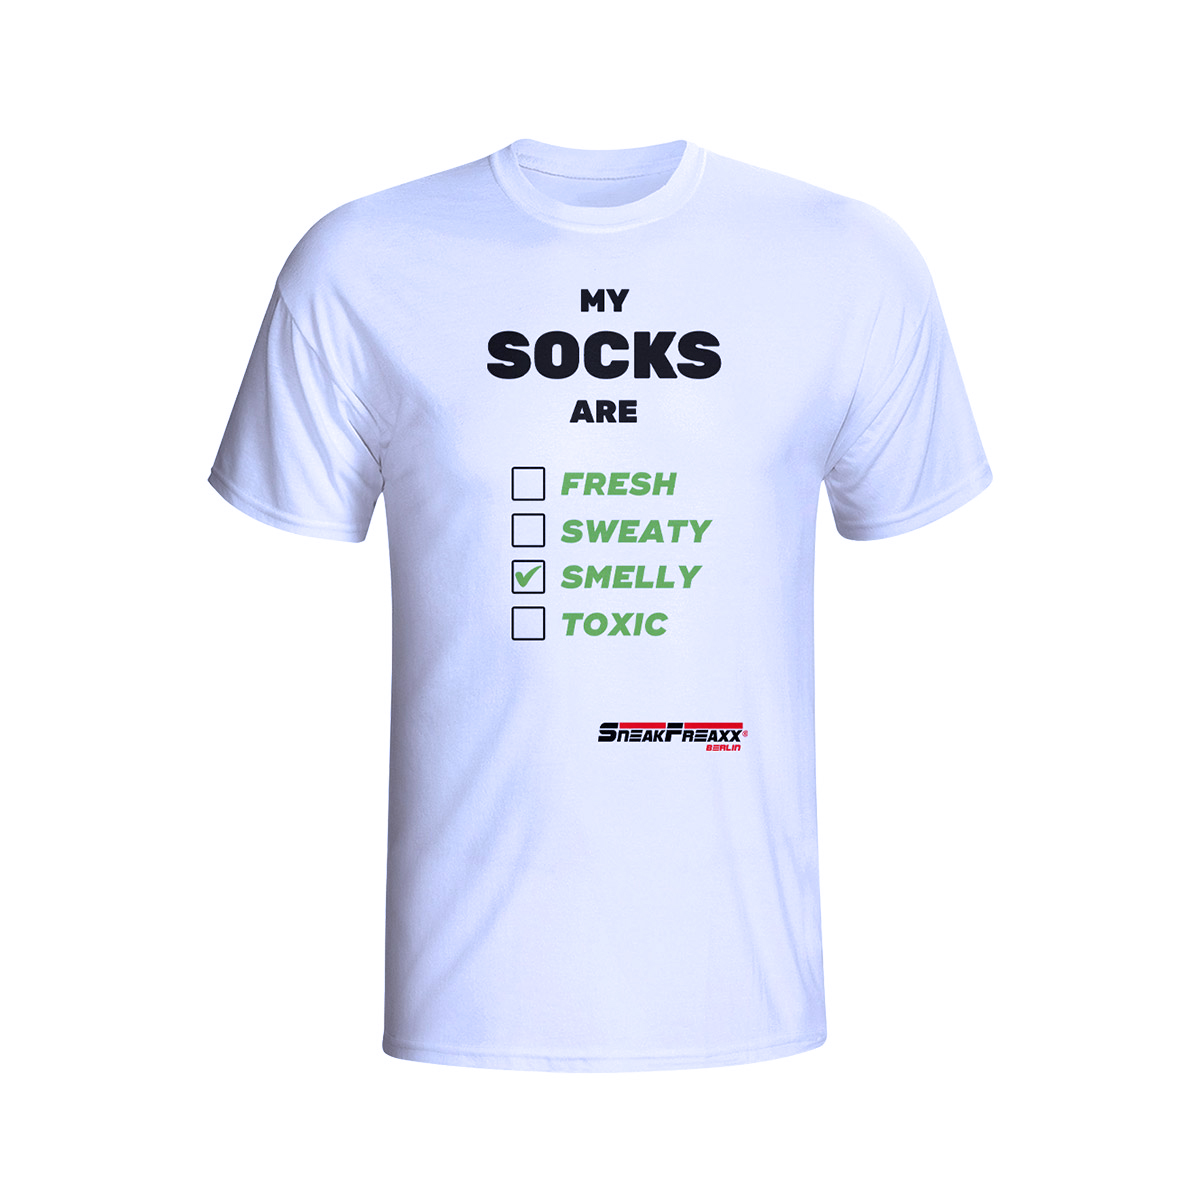 T-SHIRT - MY SOCKS ARE - WEISS